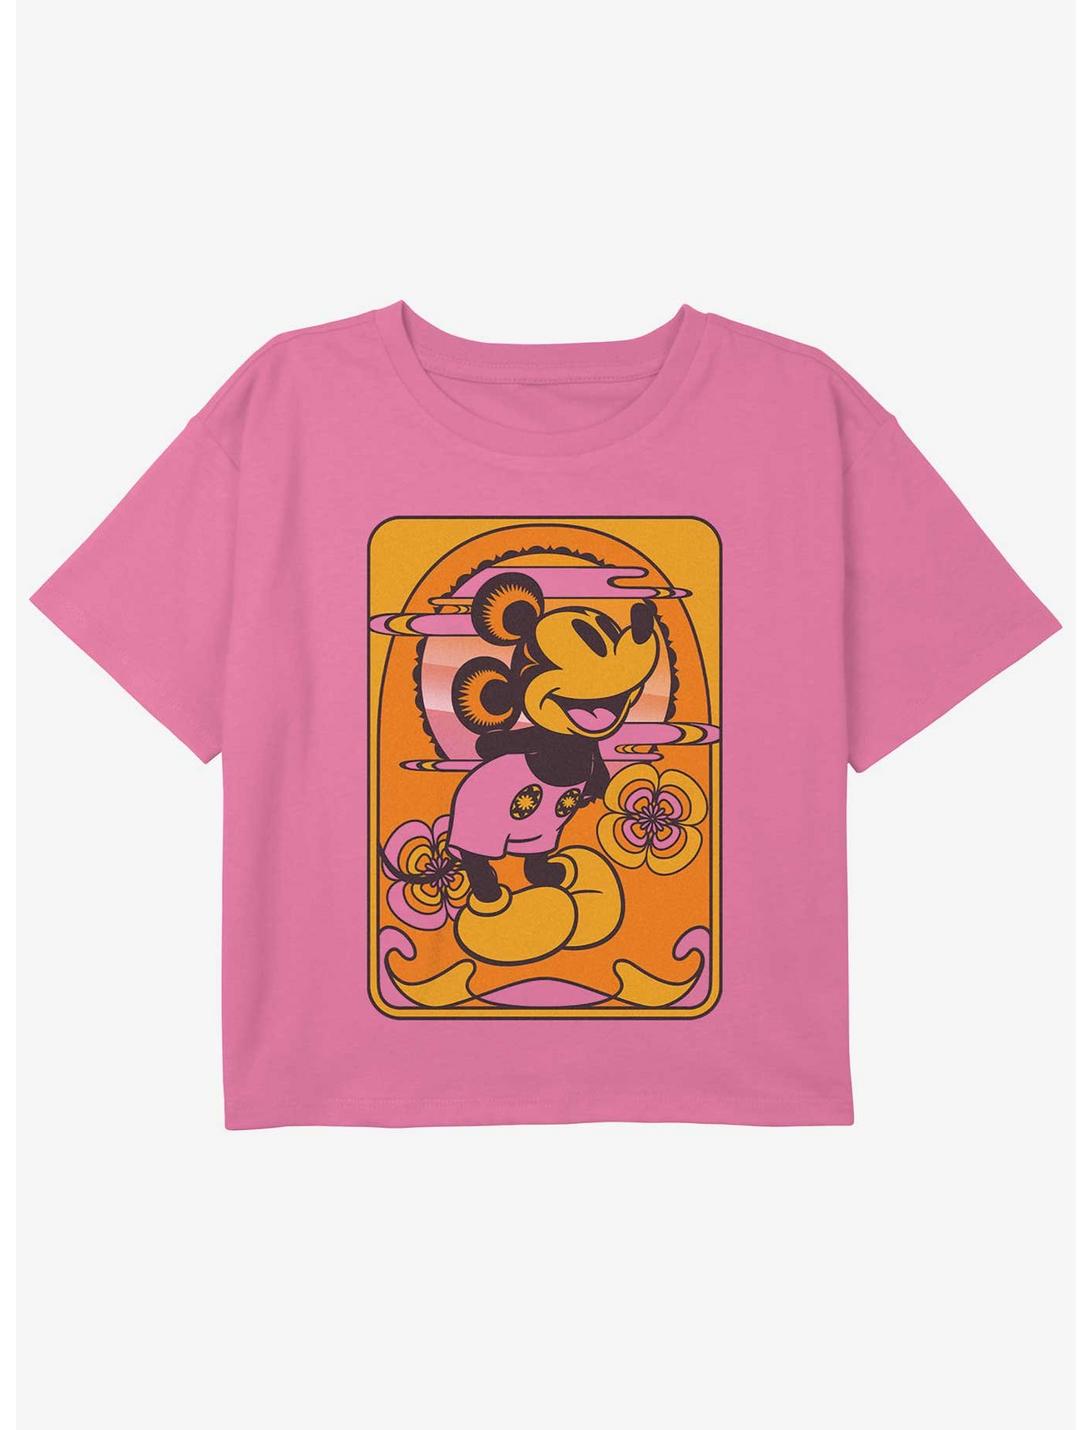 Disney Mickey Mouse Mickey Card Girls Youth Crop T-Shirt, PINK, hi-res